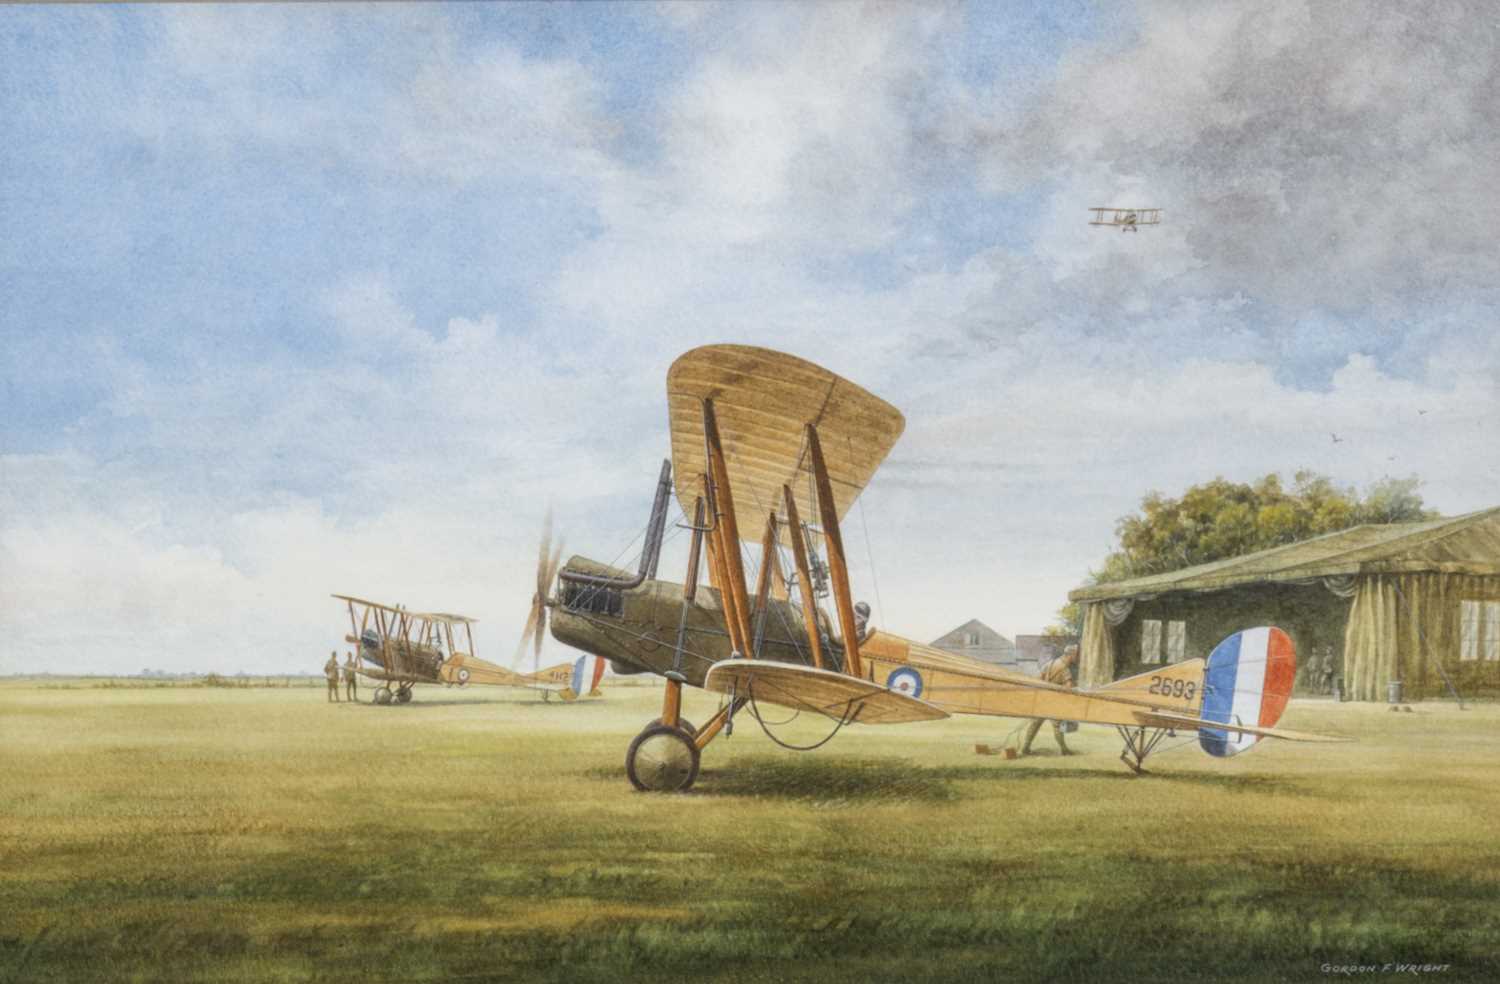 ‡ THE MILITARY CLUB HOUSE: GORDON WRIGHT, two watercolours - 'A Camel over the Lines', Sopwith F1 - Image 3 of 3